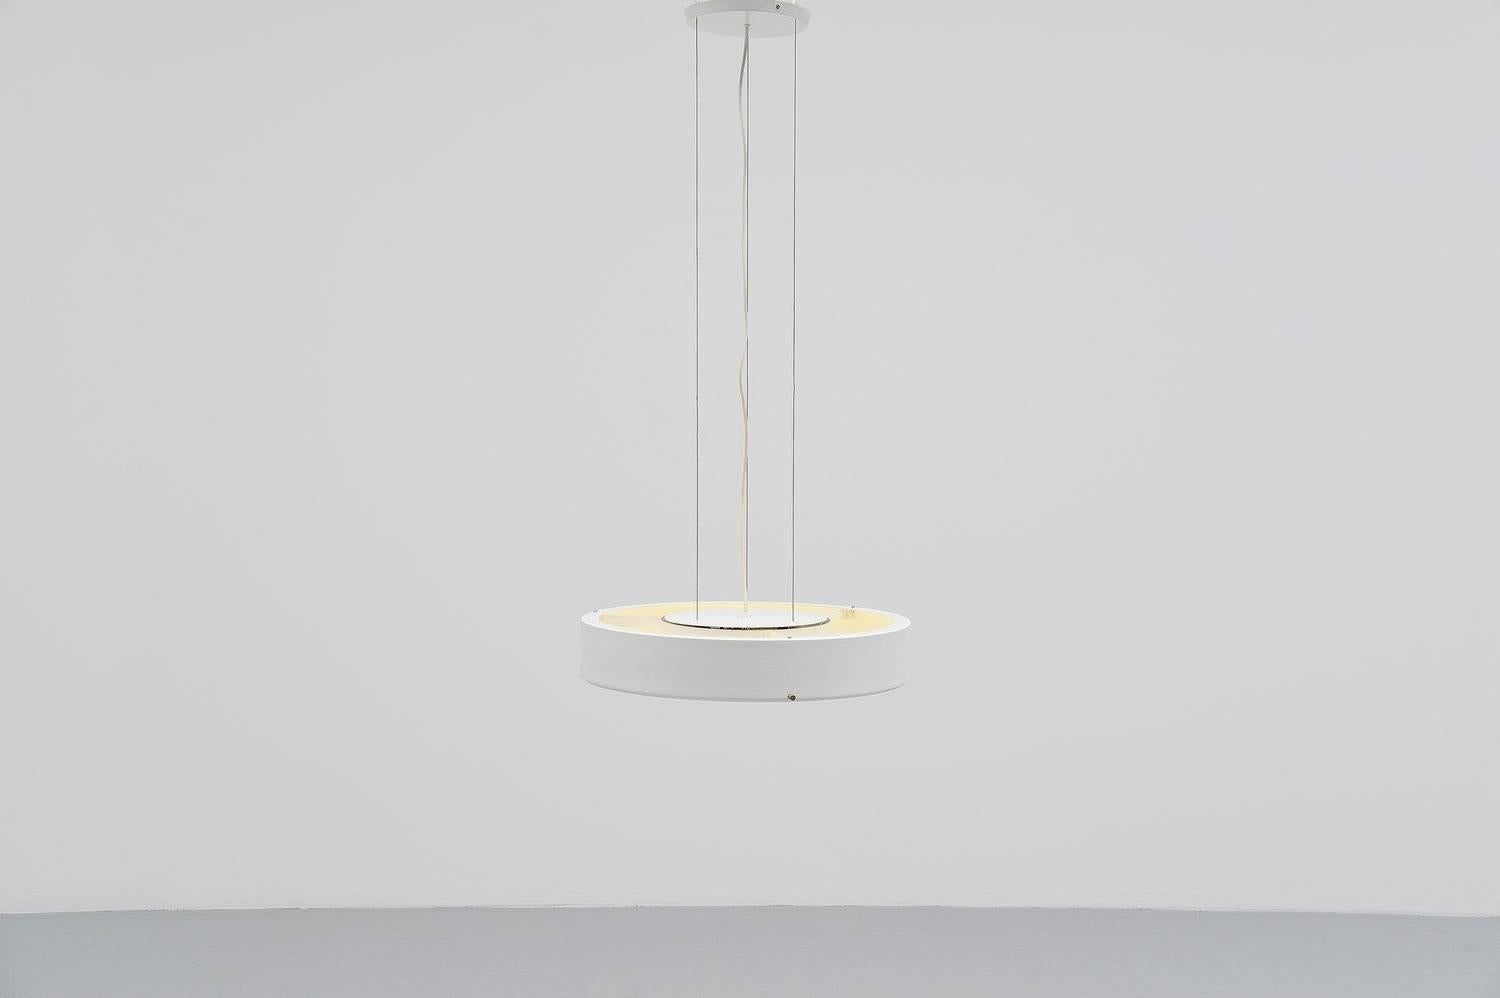 Nice large ceiling fixture model 288 designed by Bruno Gatta for Stilnovo, Italy, 1960. This lamp has a white lacquered metal shade with glass opaline glass diffuser shade. The lamp hangs on three metal wires and uses six PL lamps. It gives very